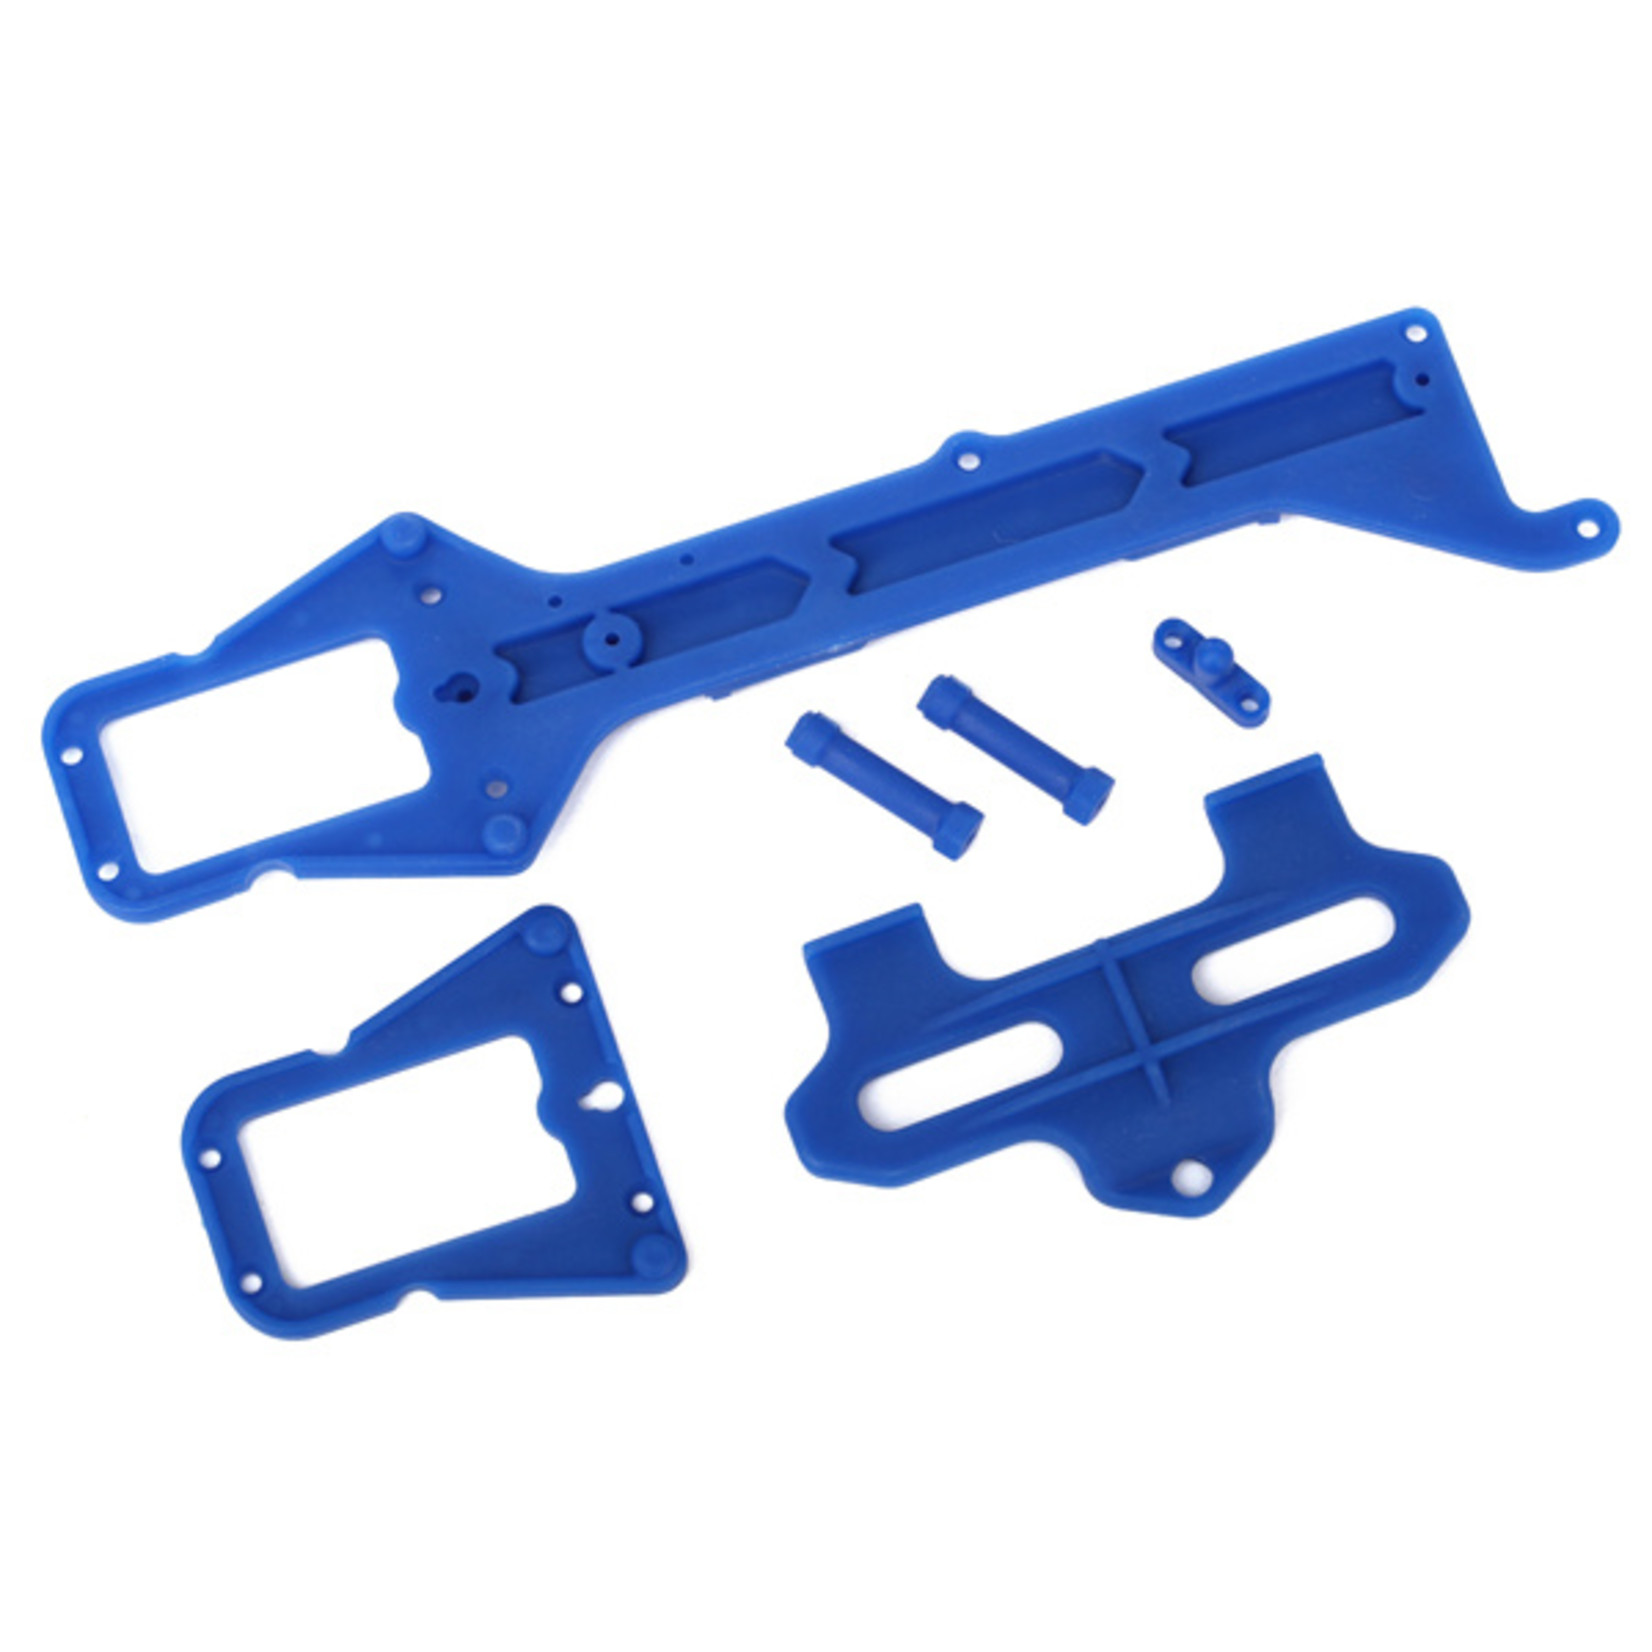 Traxxas 7523 - Upper chassis/ battery hold down